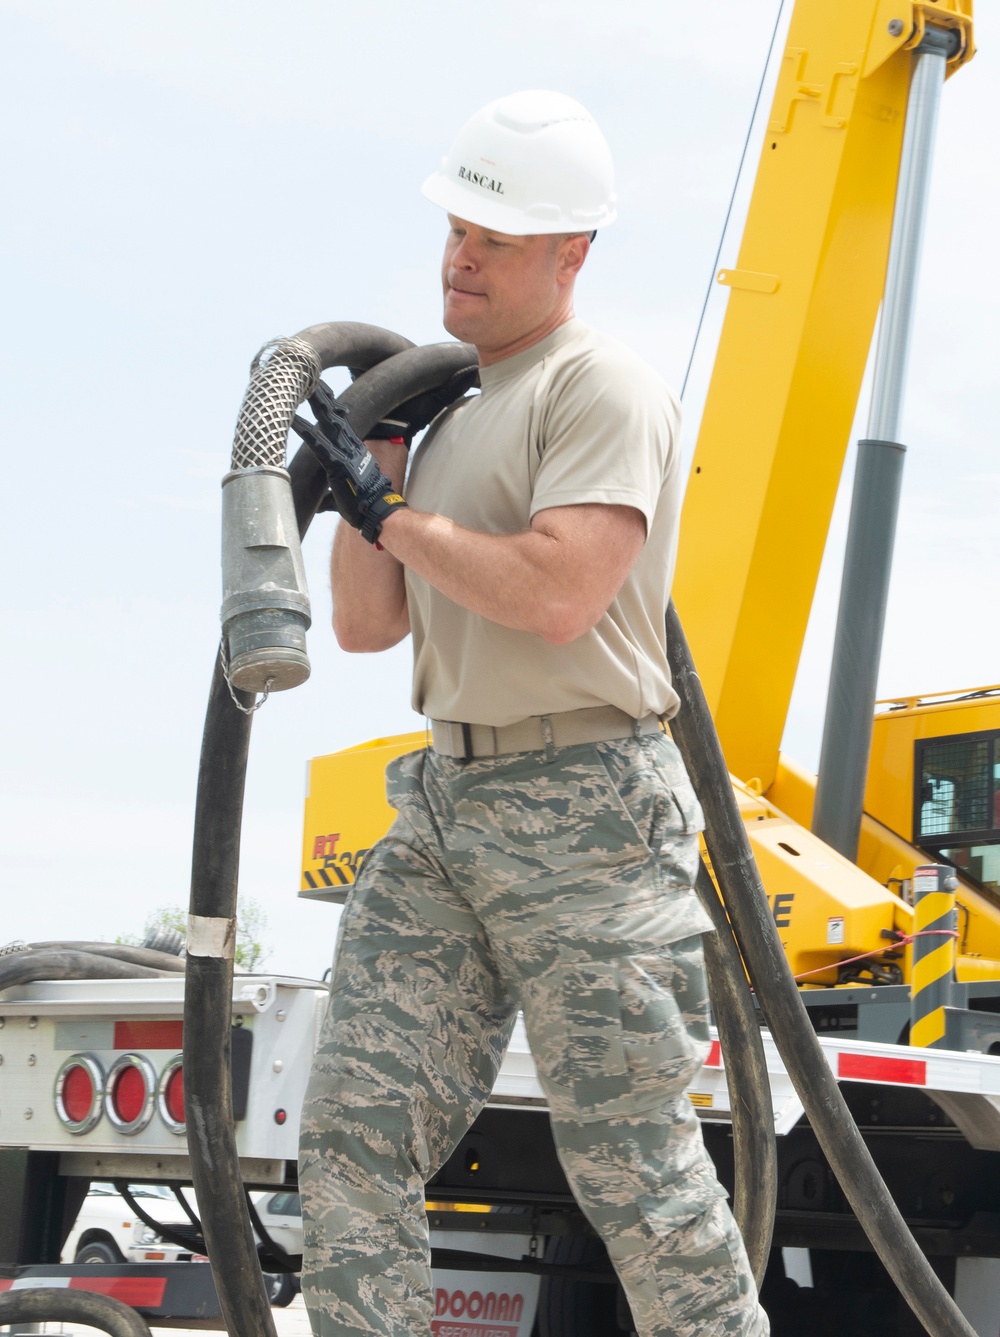 RASCAL restoring readiness, the Air Force way